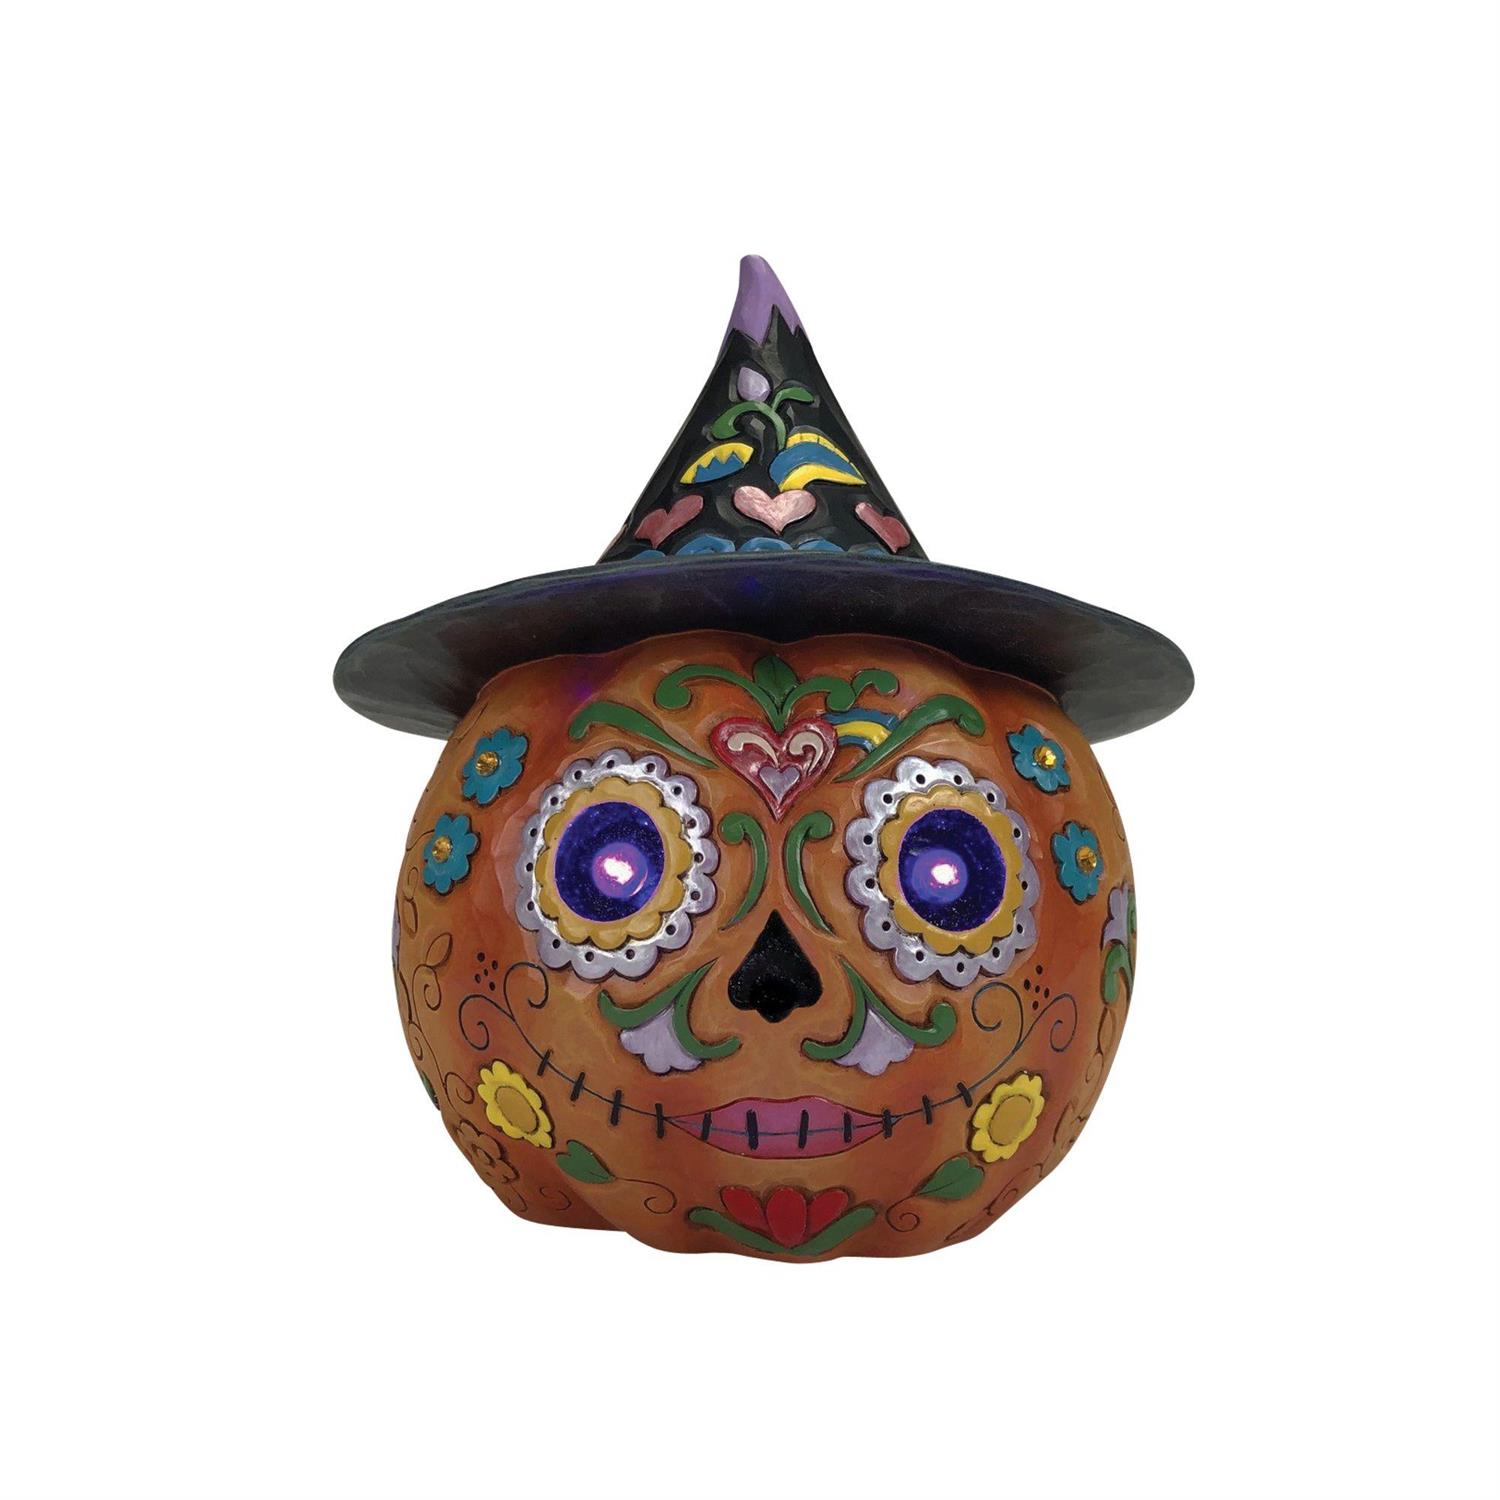 Enesco Gifts Jim Shore Heartwood Creek Day of the Dead Jack O Lantern Figurine Free Shipping Iveys Gifts And Decor